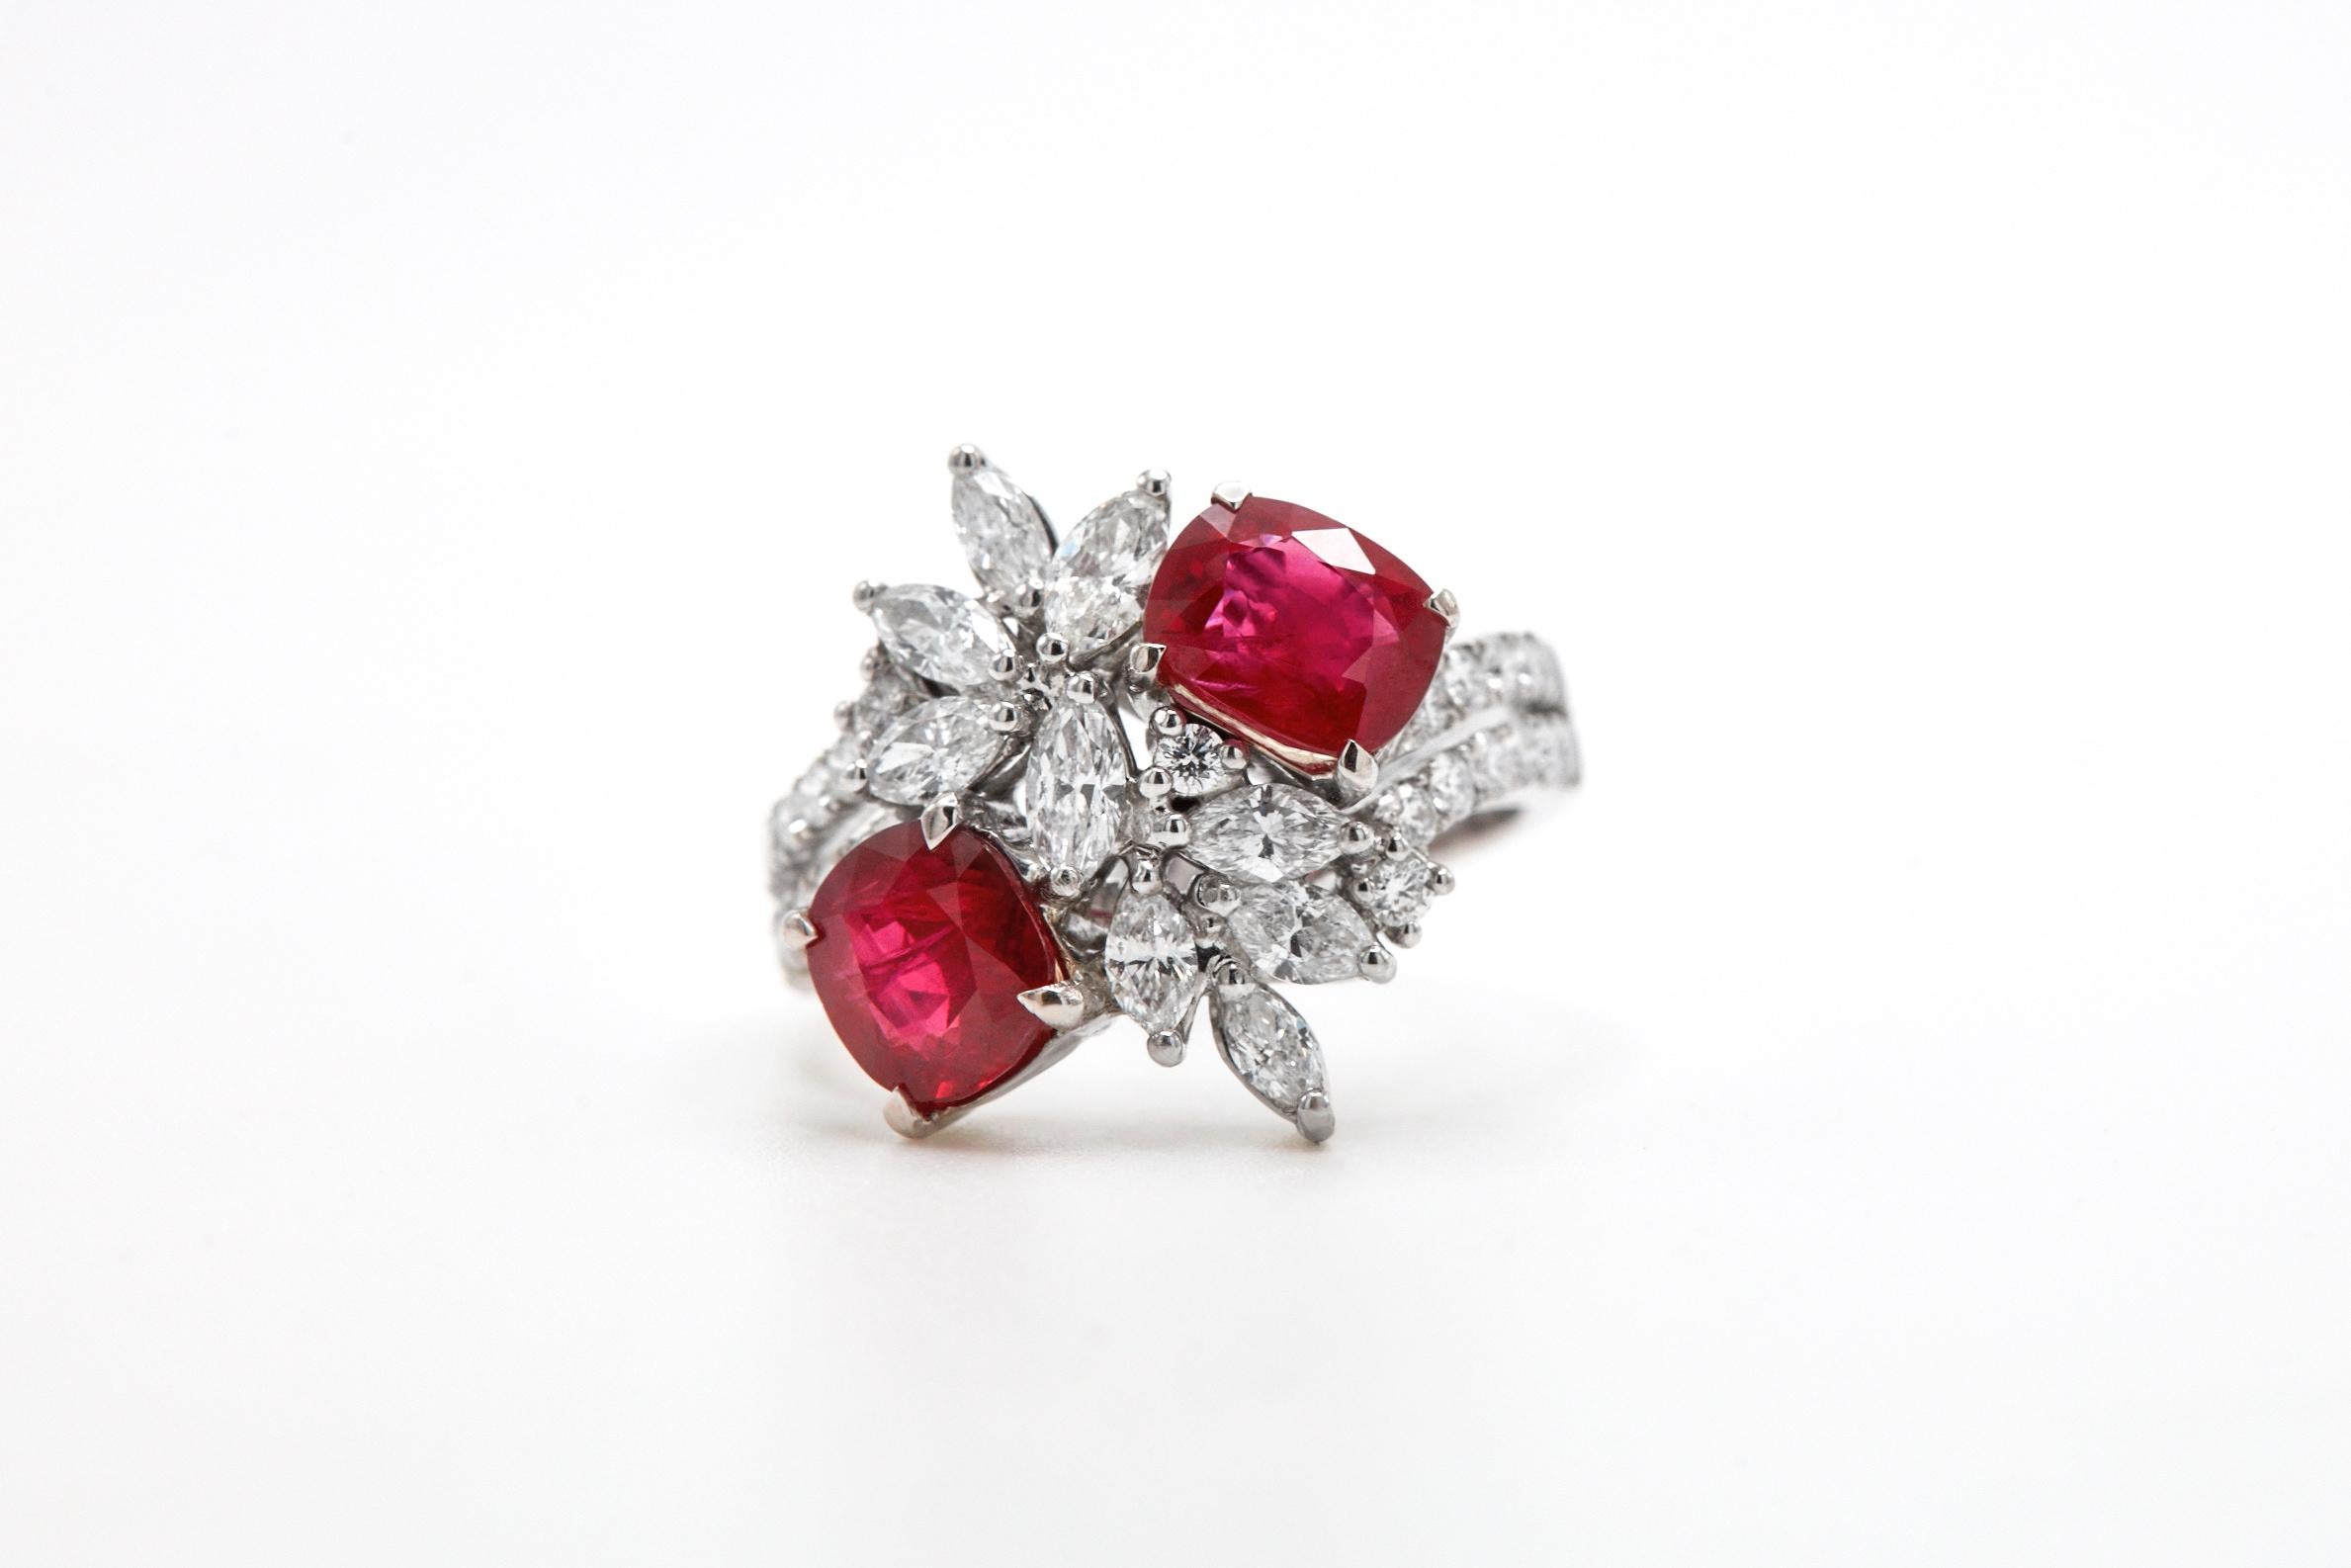 18K WHITE GOLD
26 ROUND DIAMONDS, 0.47 CARATS
10 MARQUIS DIAMONDS, 0.81 CARATS
2 NO HEAT PIGEON BLOOD RUBIES, 1.30 CT & 1.07 CT
GIA LAB CERTIFIED 

Introducing our exquisite Floral Toi et Moi Ring, a stunning blend of nature's beauty and dazzling